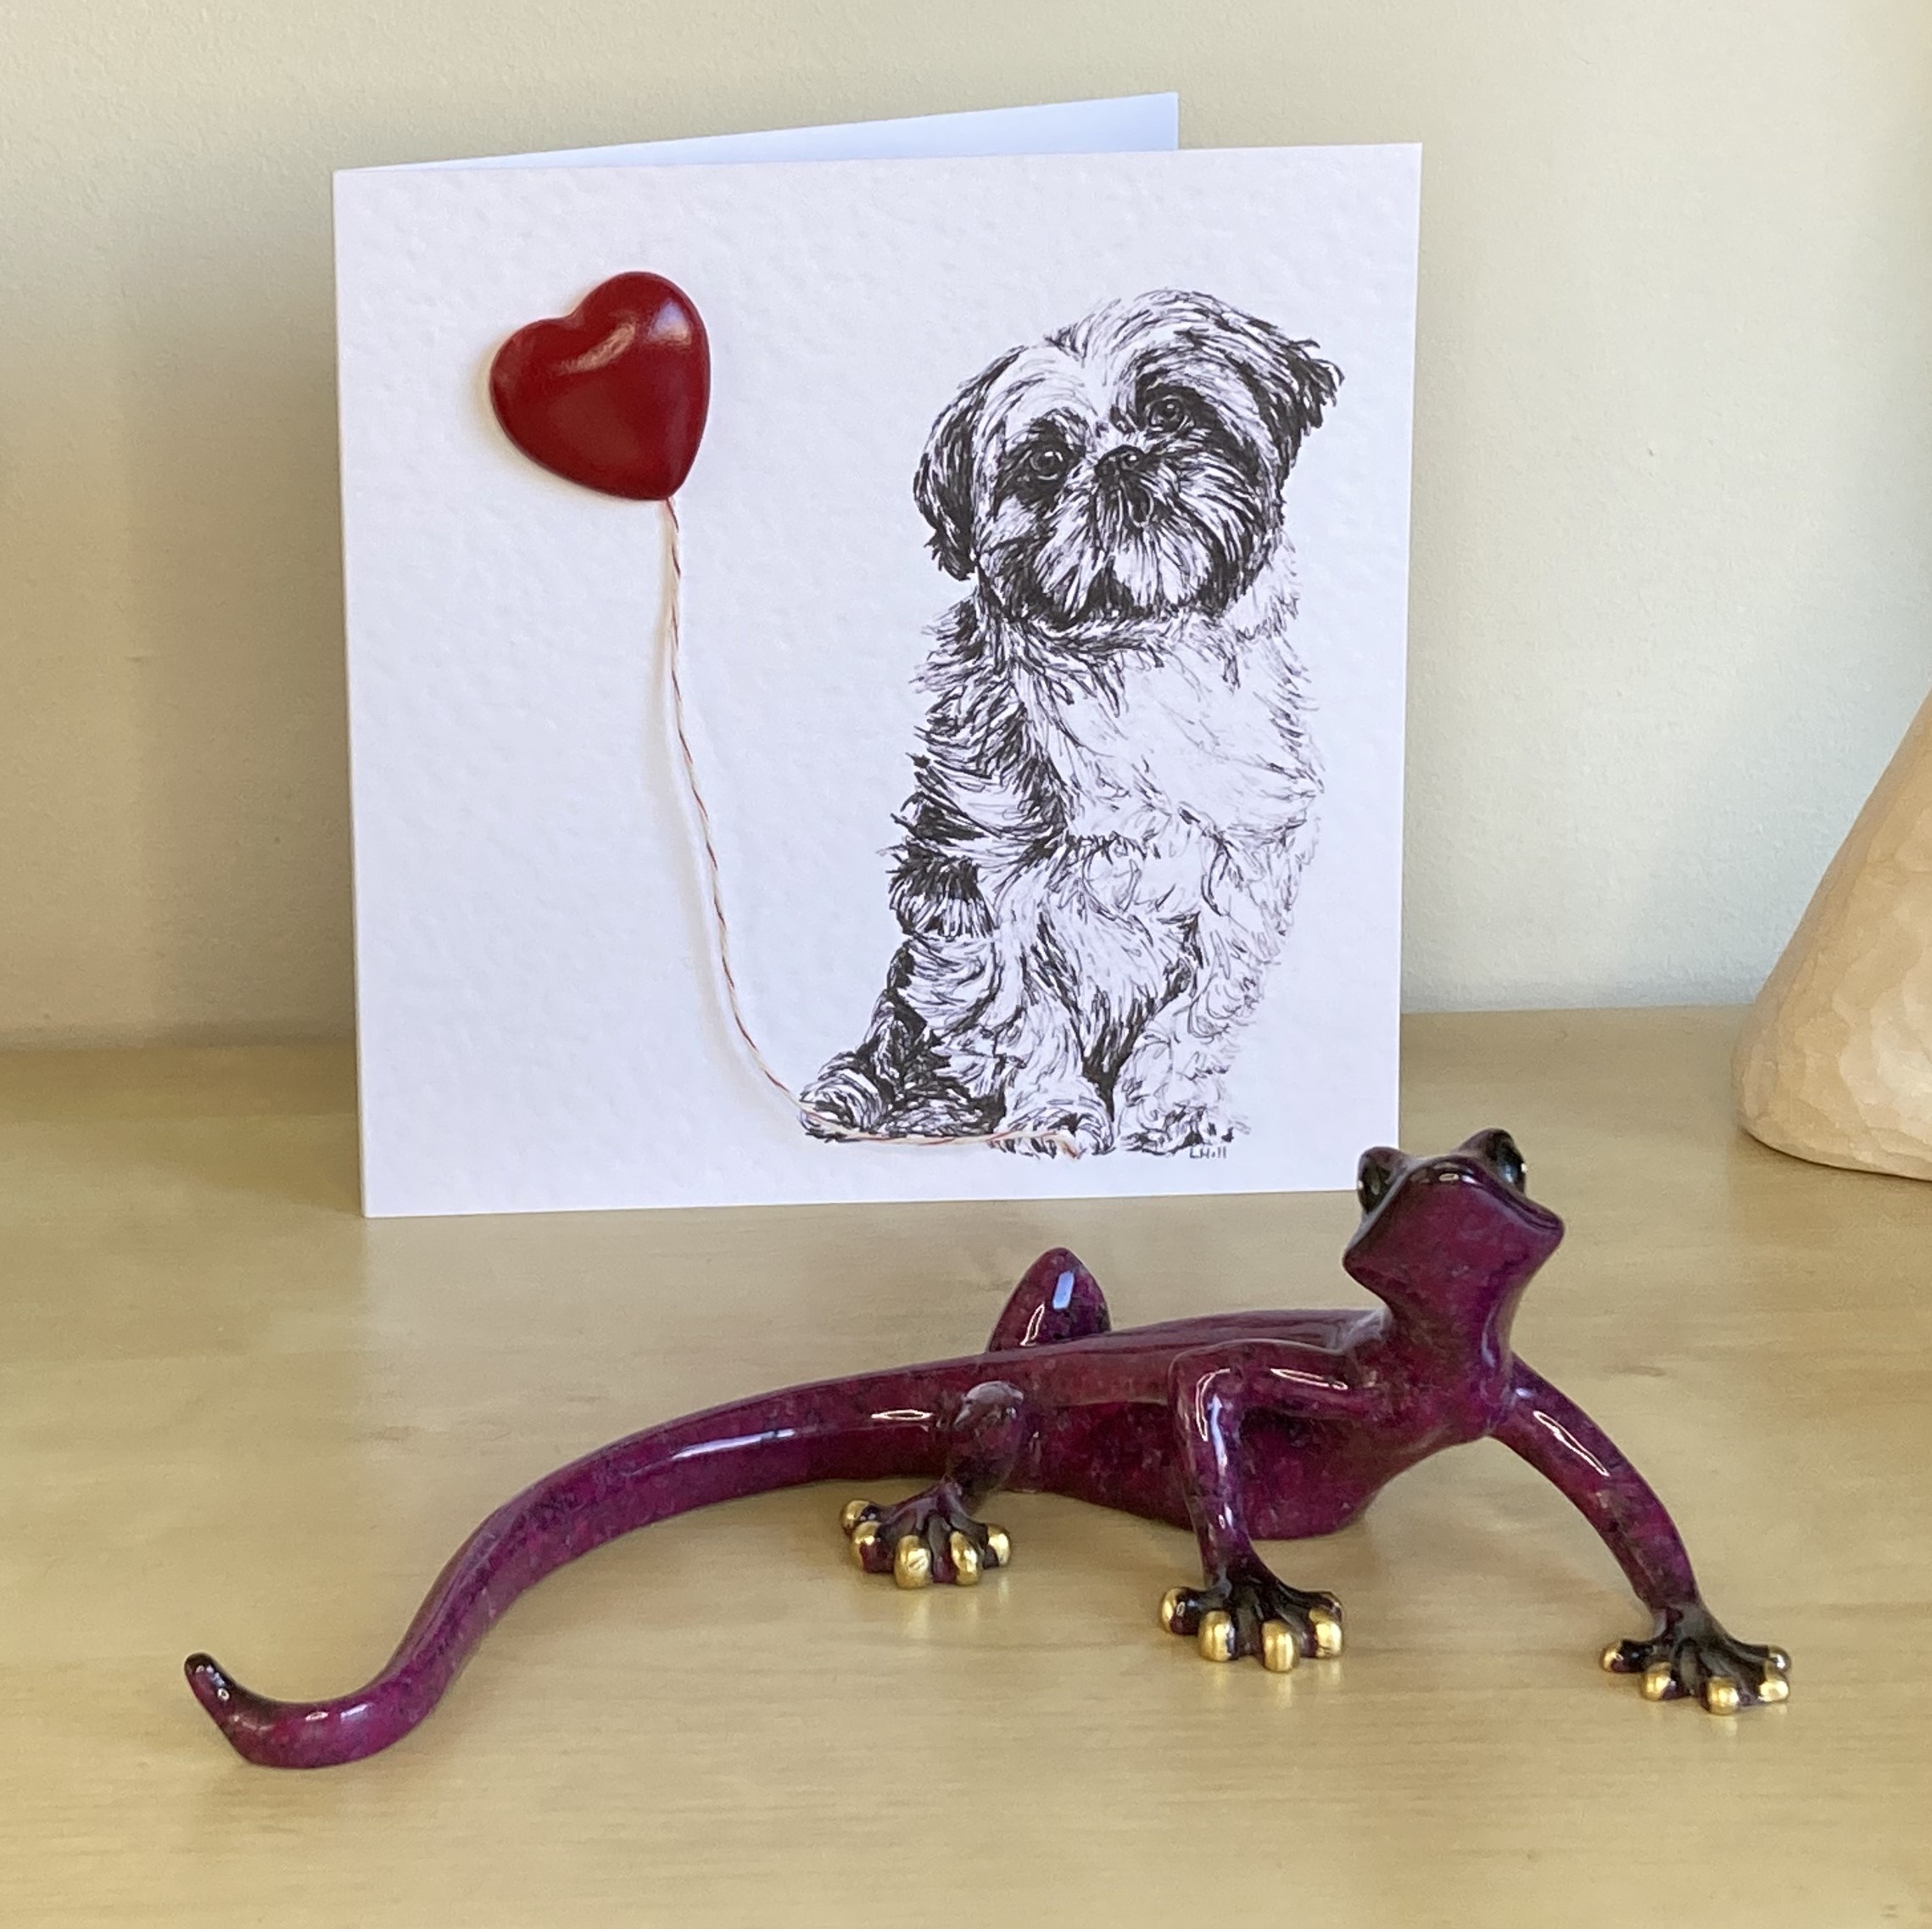 Shih Tzu 15cm greetings card with 3D red heart balloon